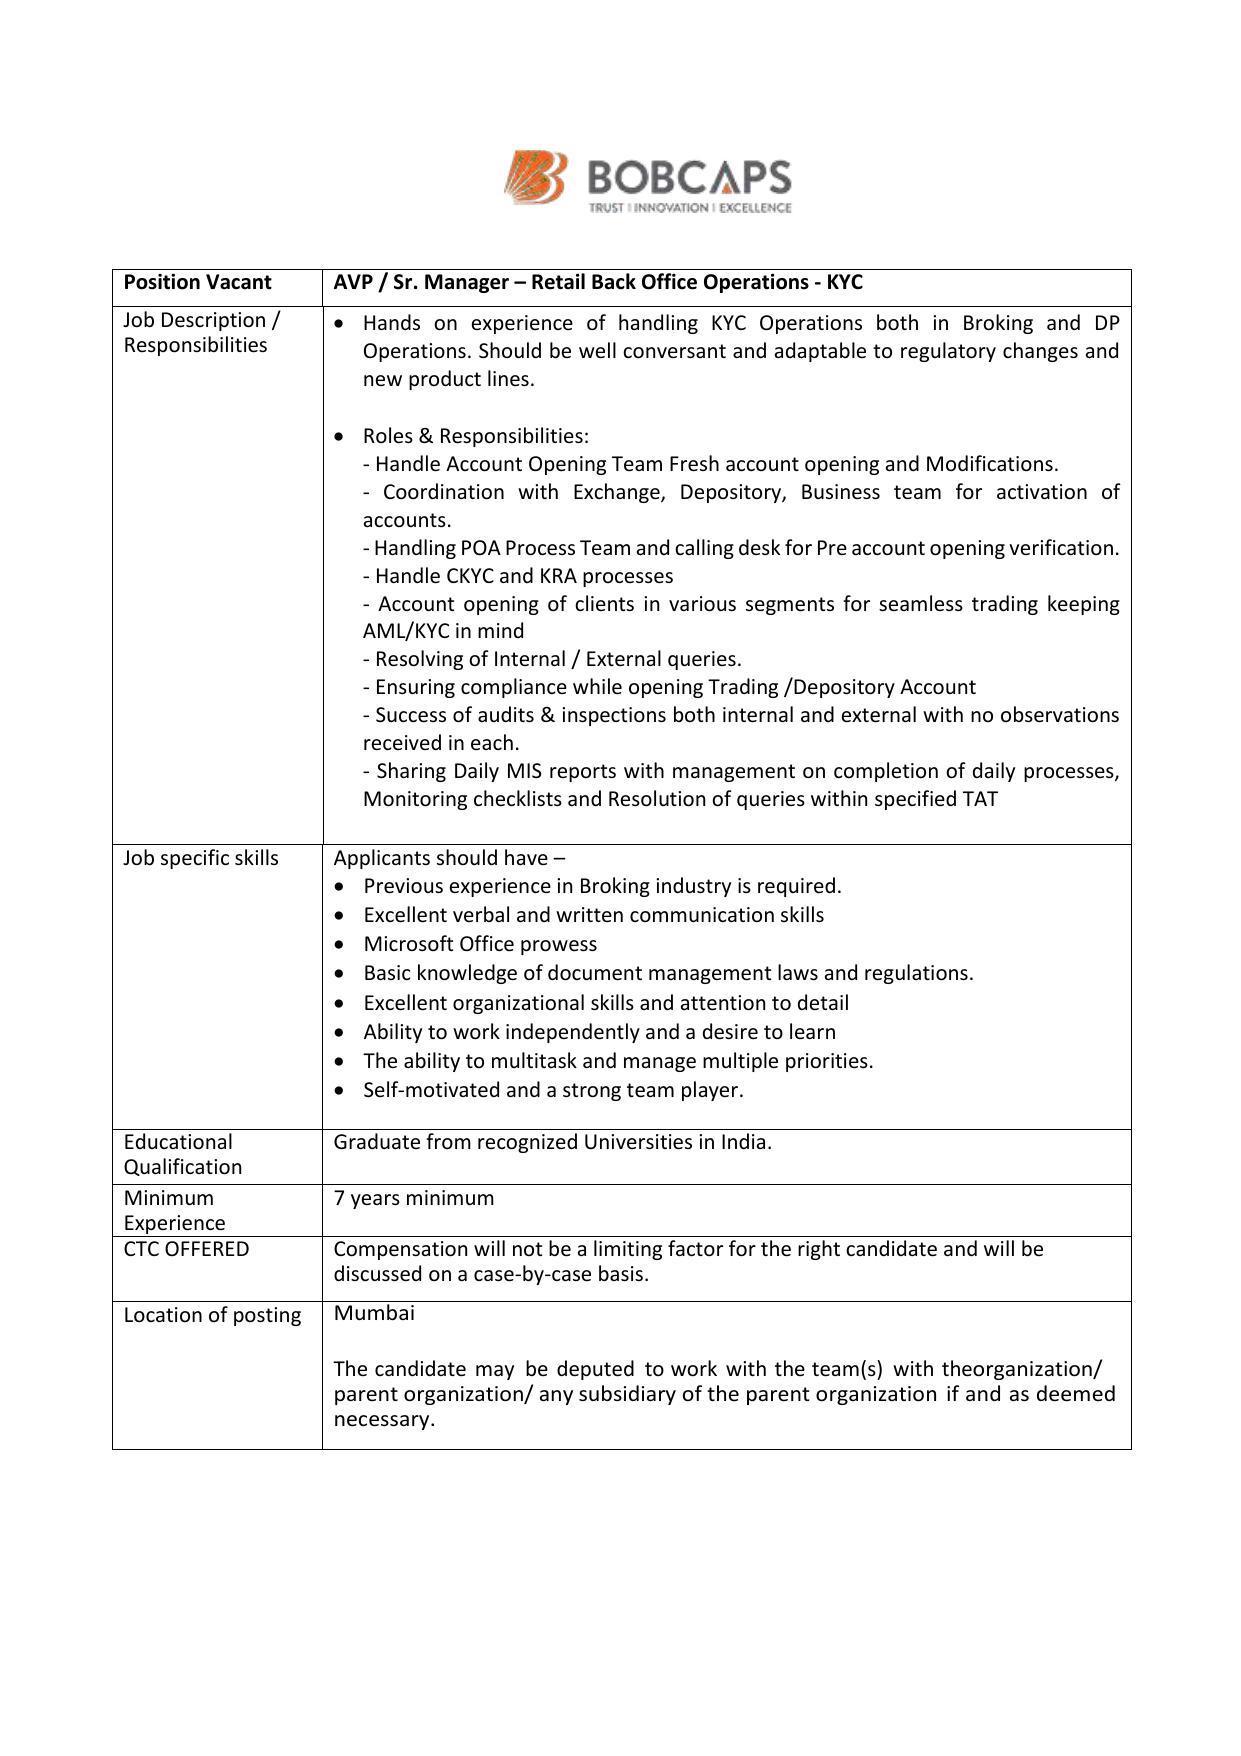 BOB Capital Markets Invites Application for Assistant Vice President or Senior Manager Recruitment 2022 - Page 2